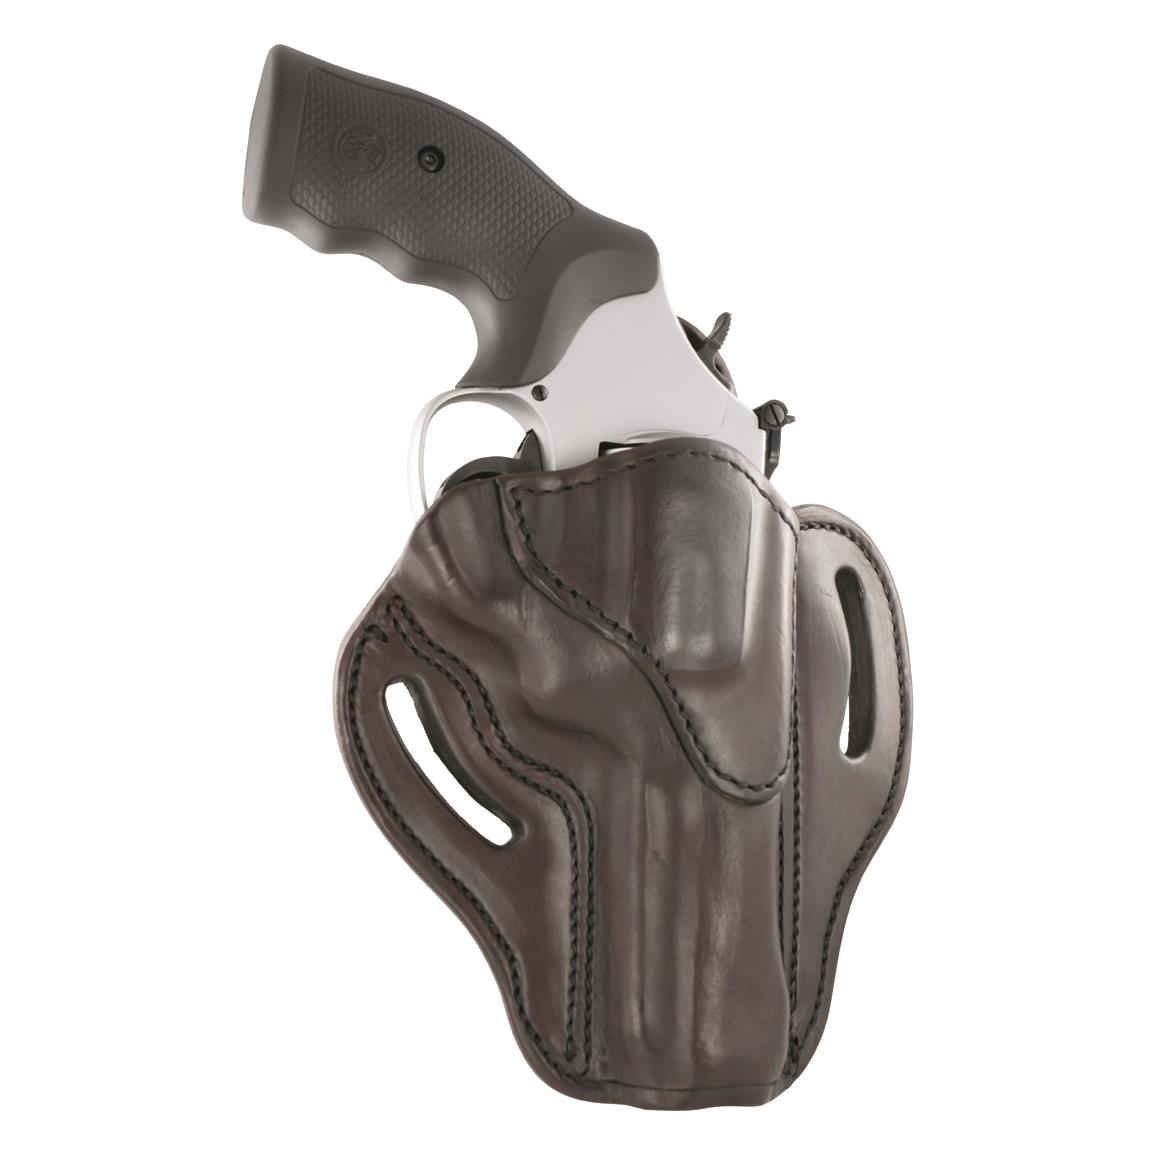 Pro-Tech Nylon Gun holster For S&W 38 special CTG Revolver With 3" Barrel 